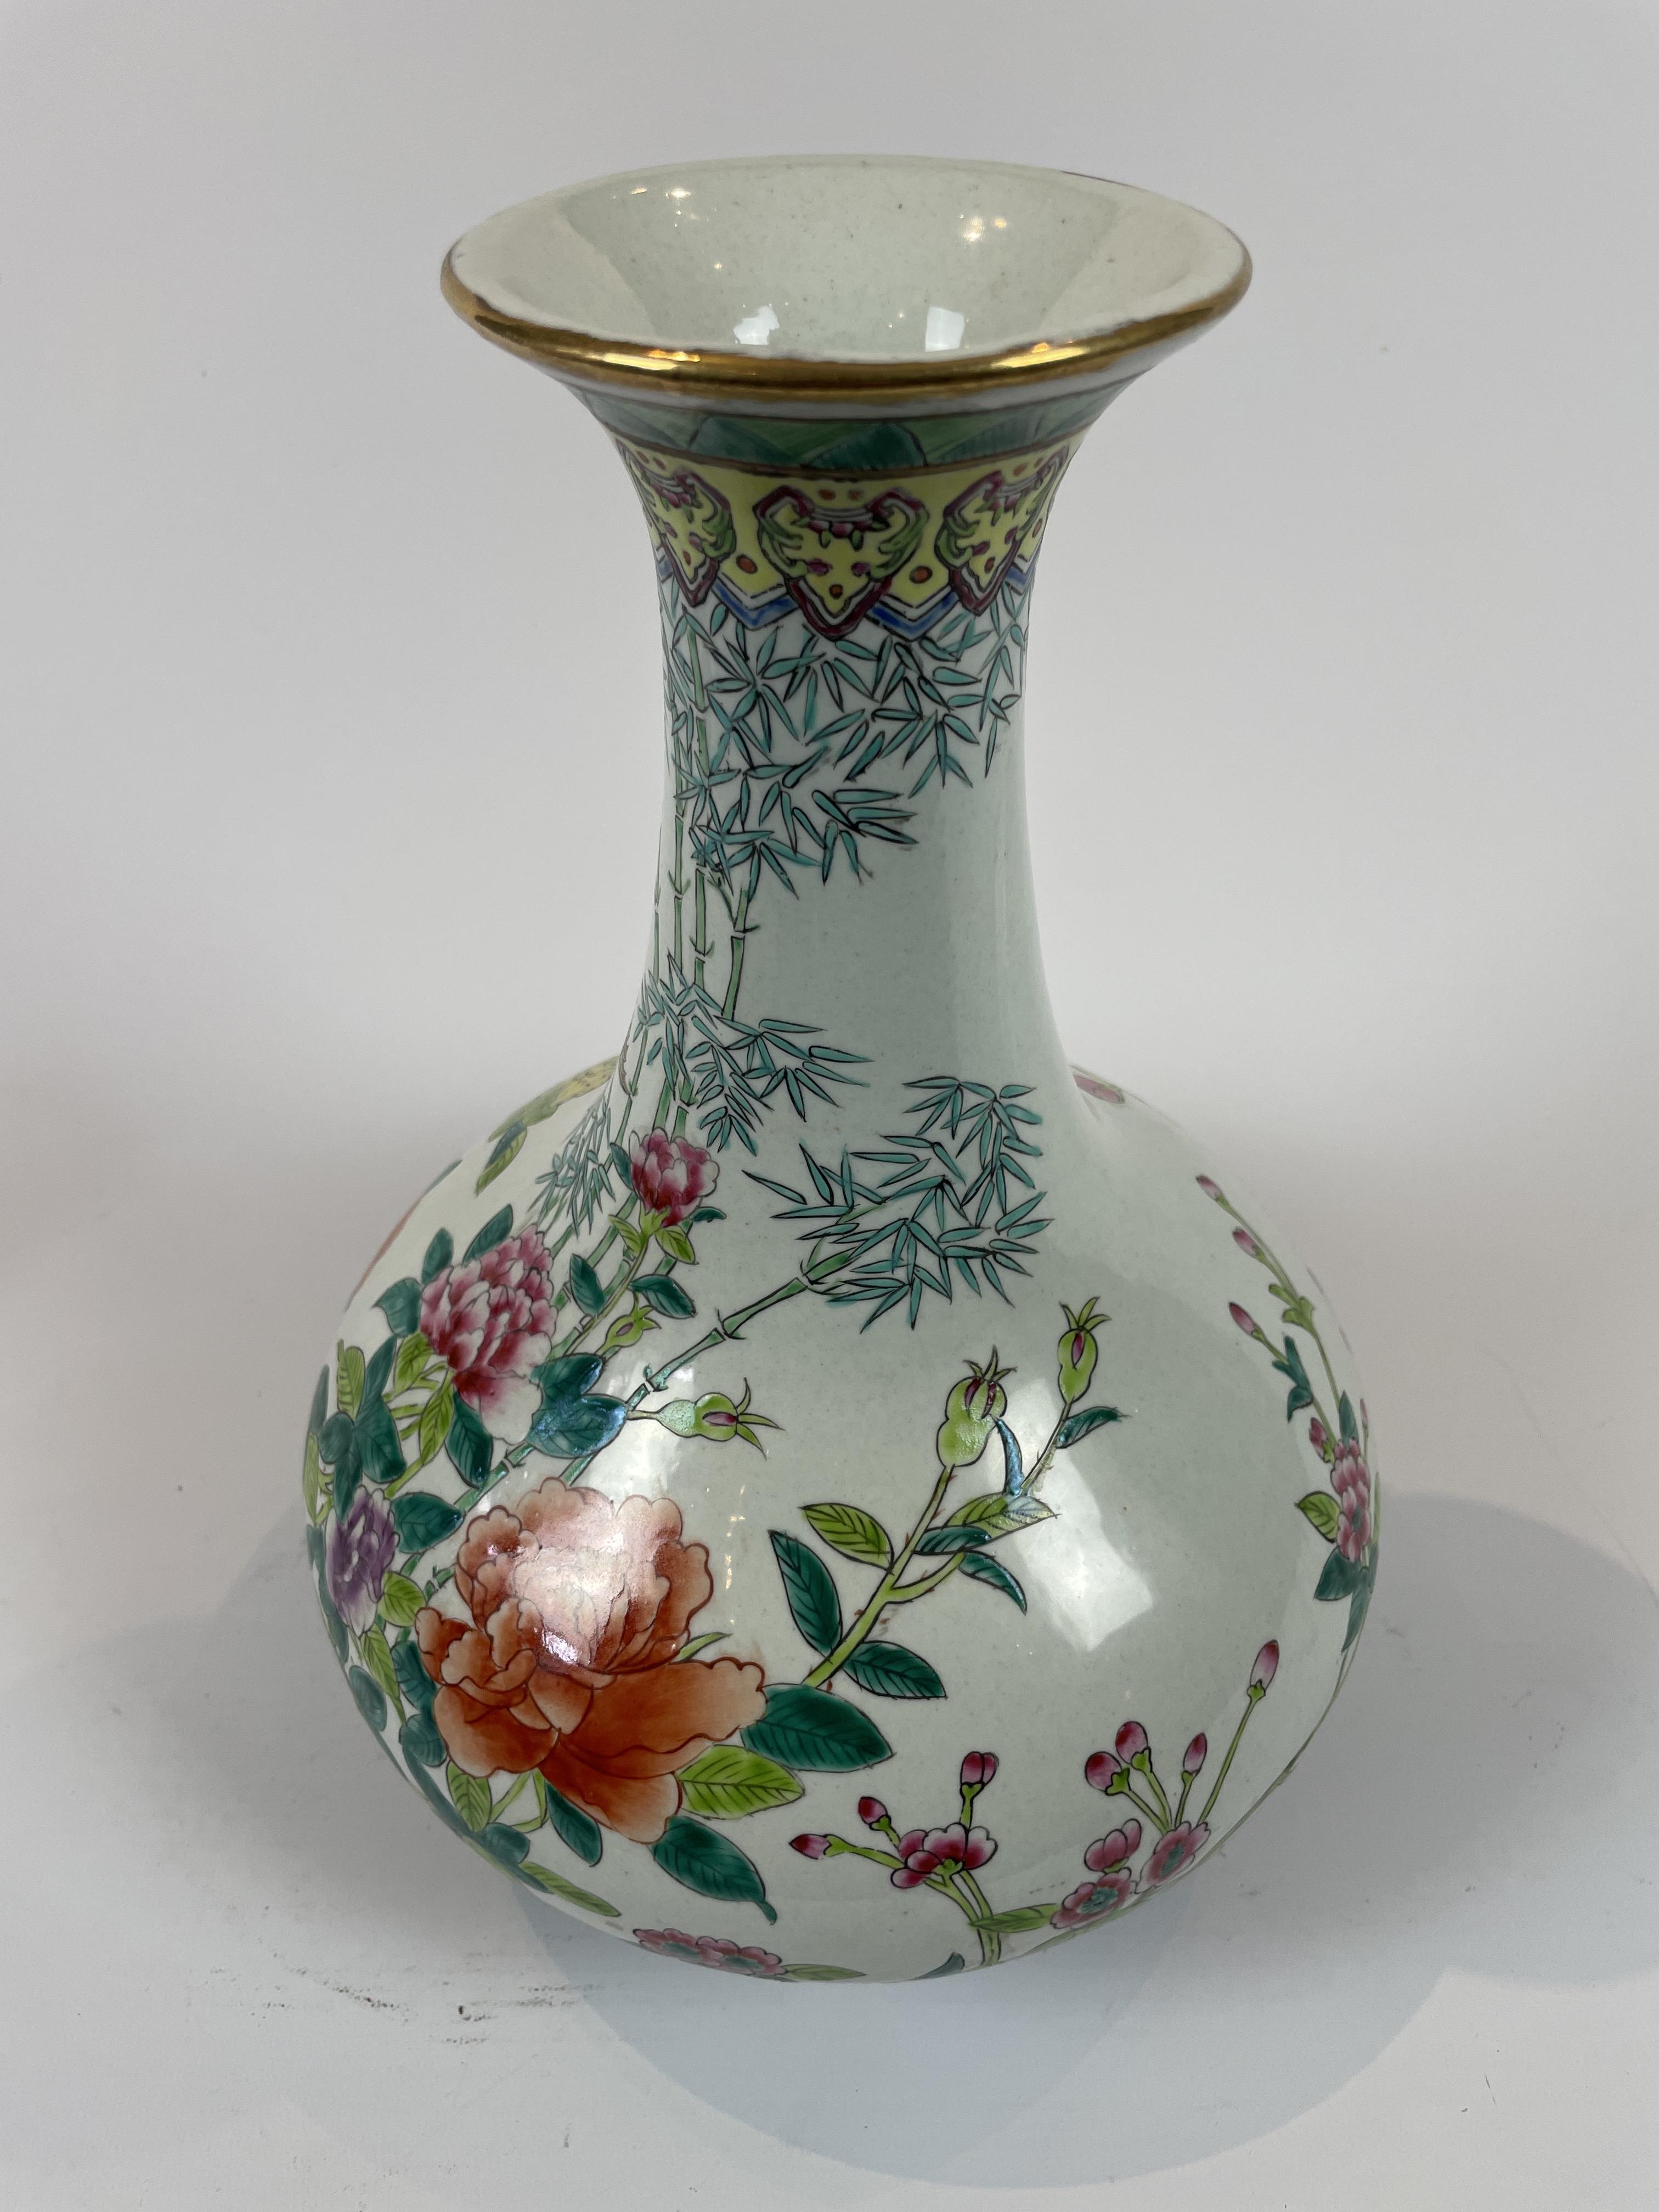 Decorative Oriental jar shaped vase with roses, bamboo and birds  - Image 3 of 3